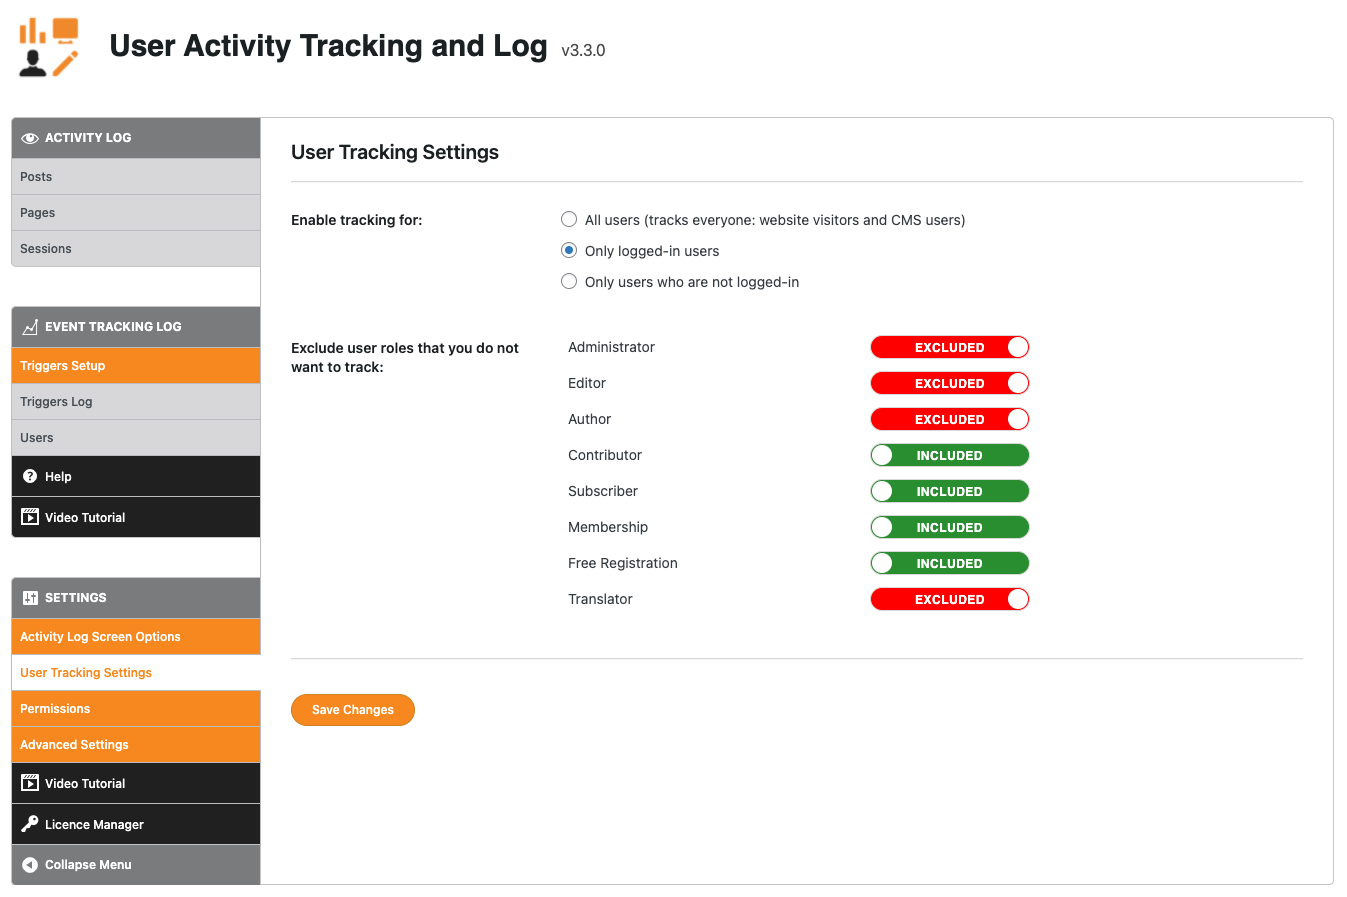 User Activity Tracking and Log - Activity Log - Sessions [Premium]